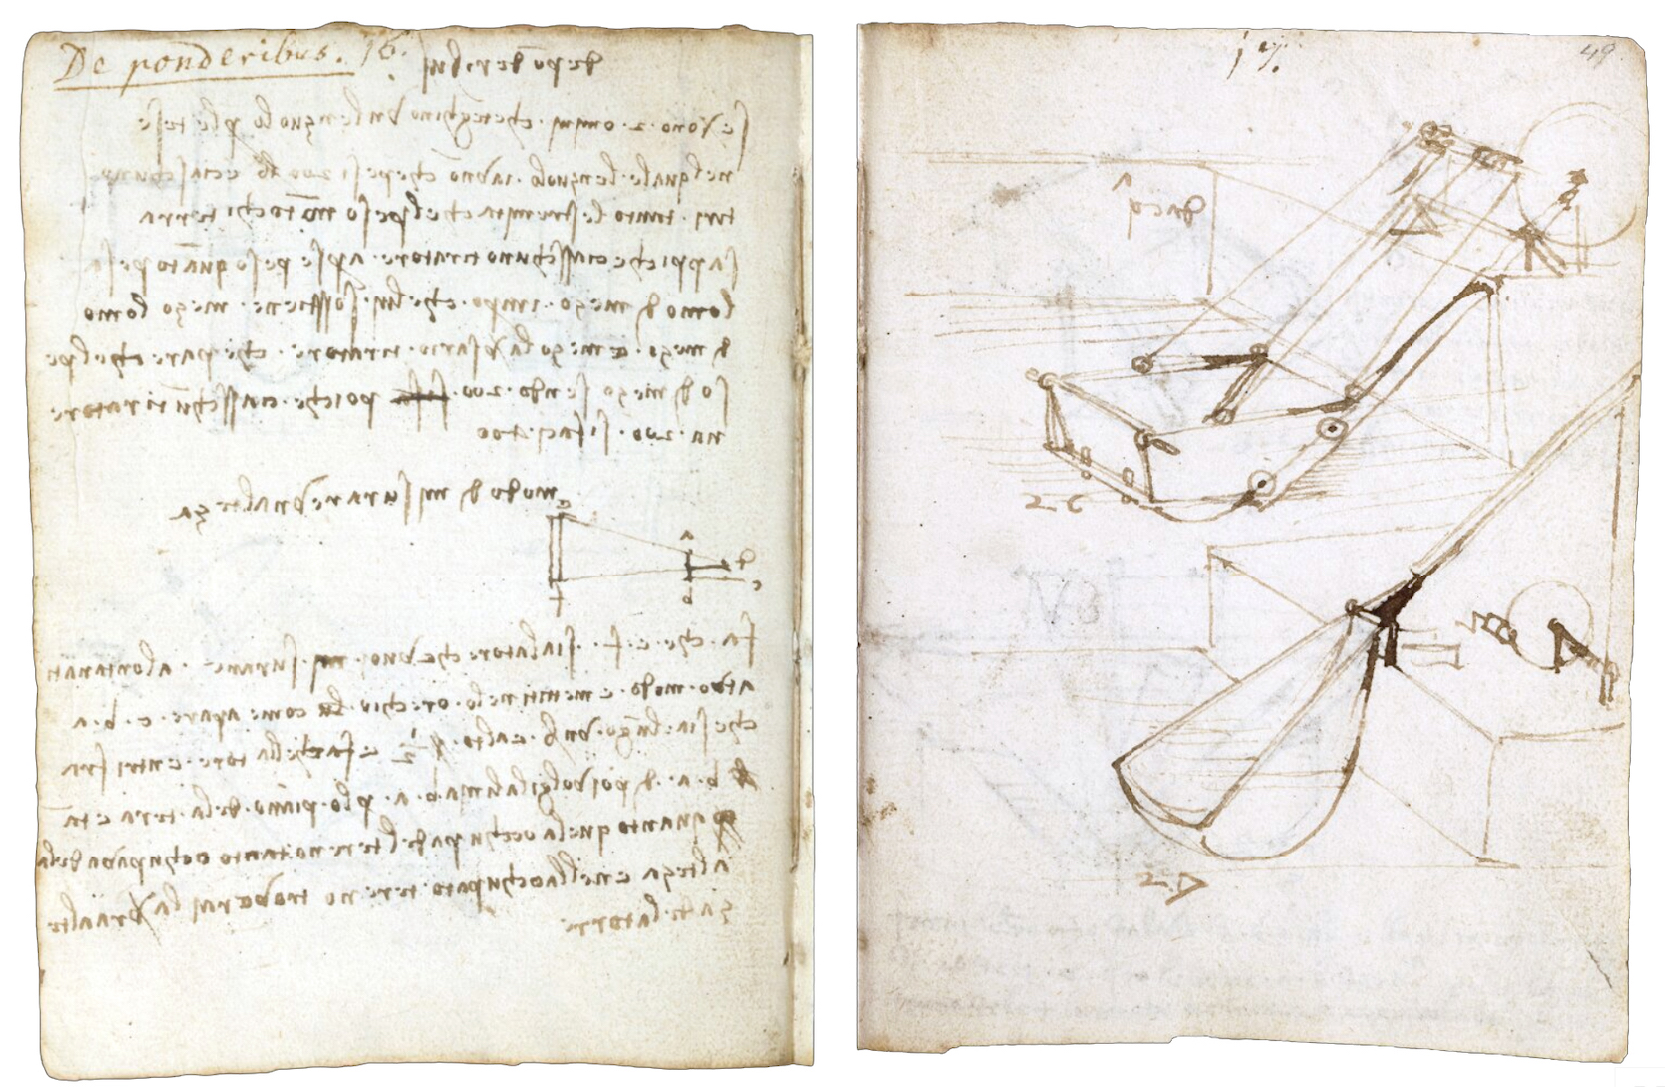 Leonardo da Vinci, Drawings of hydraulics and engineering machines, 1487 to 1505, Codex Forster I (National Art Library, Museum no. MSL/1876/Forster/141/I)